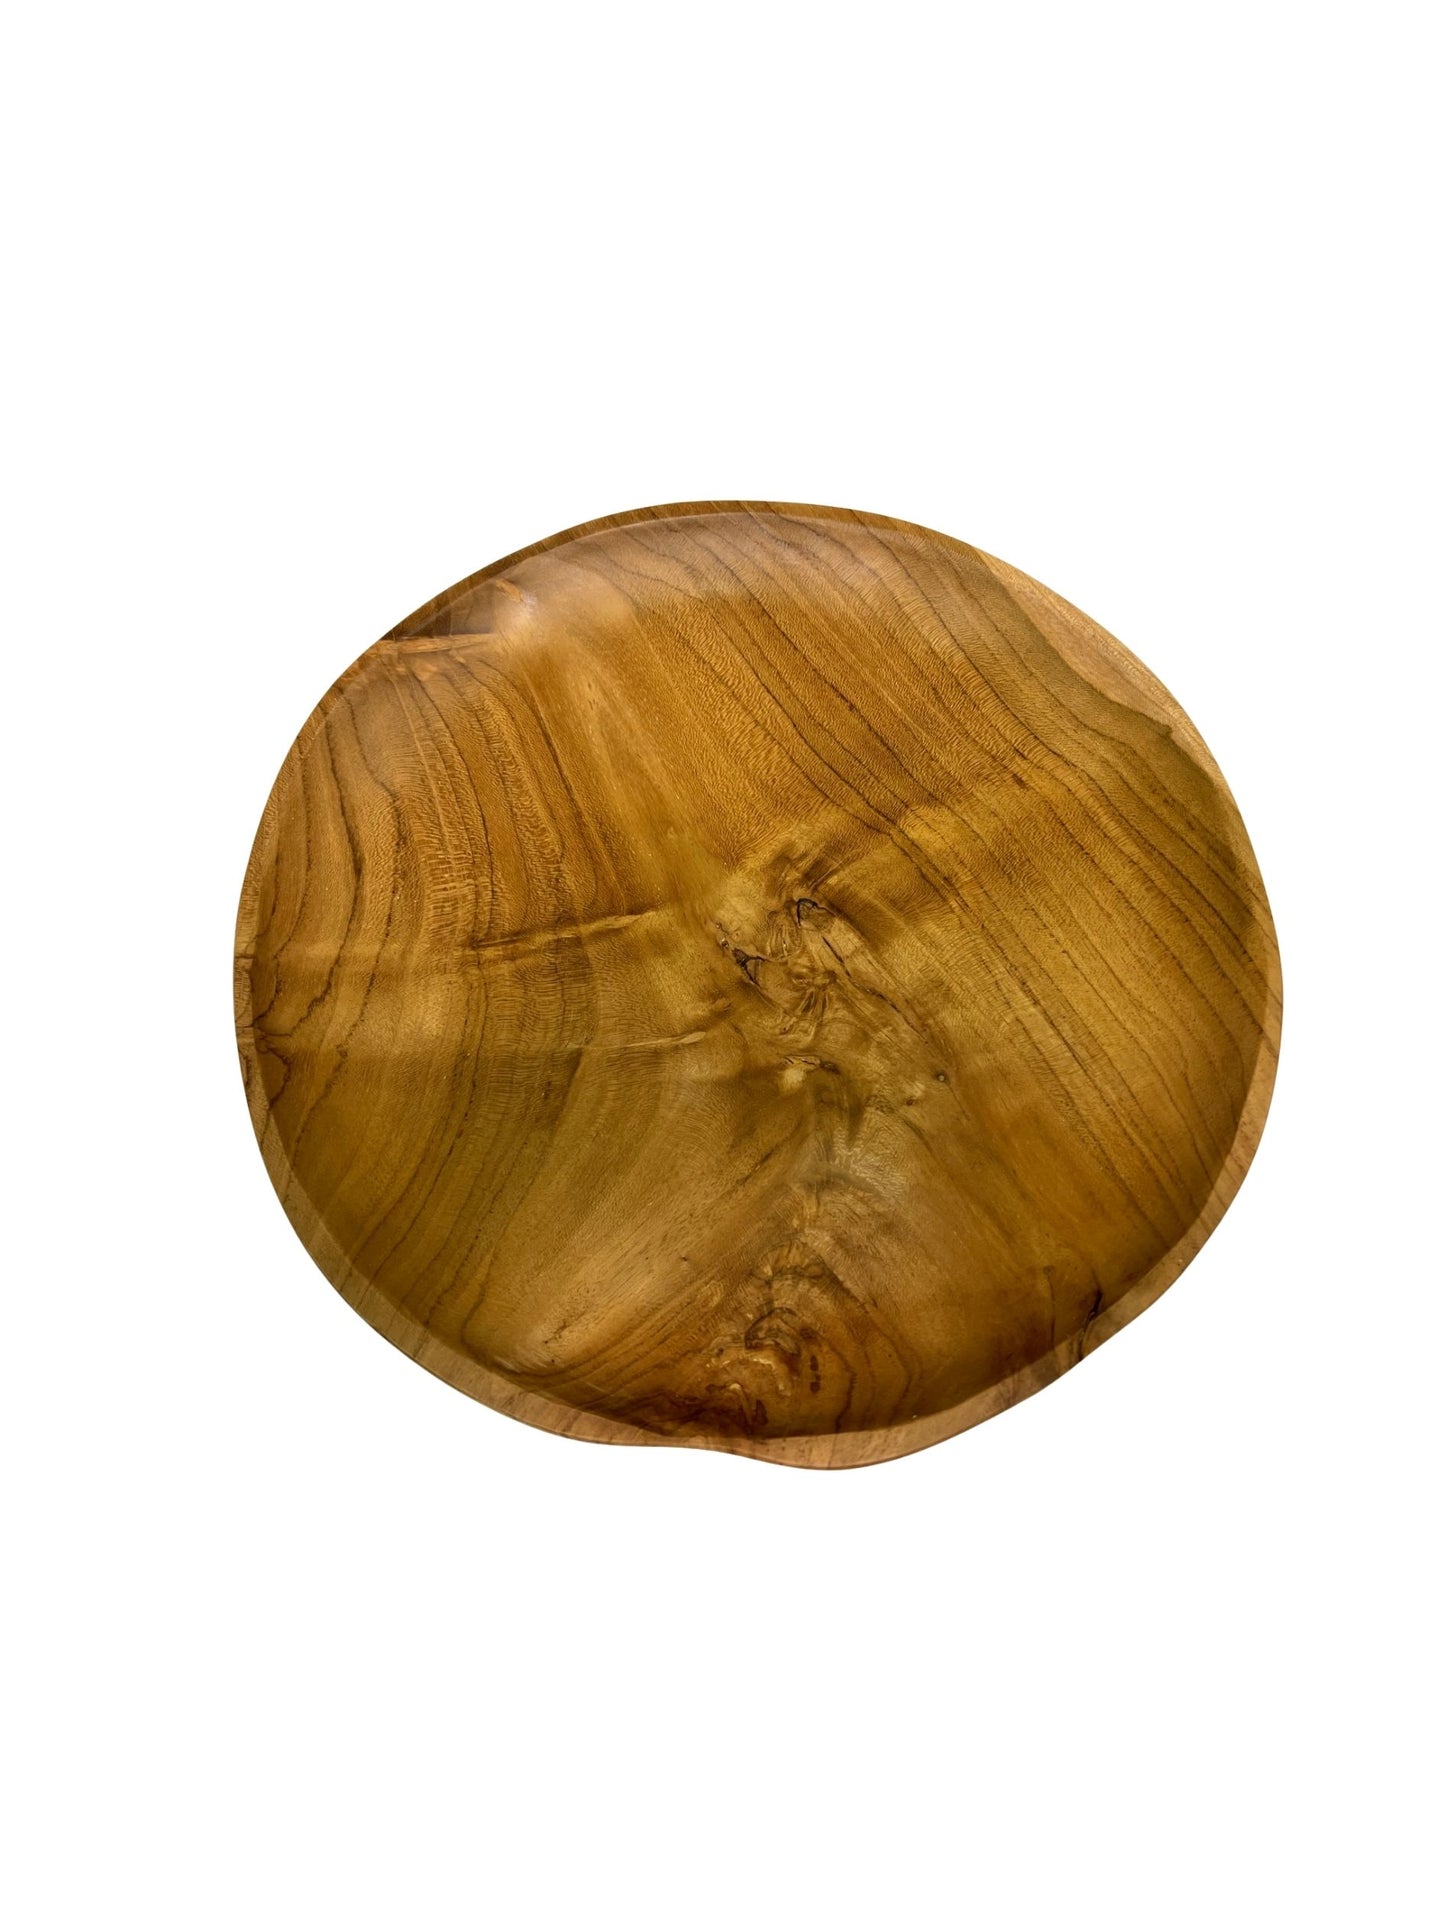 Eclectic Home Accent Teak Plate 2902 Natural  Decor Furniture